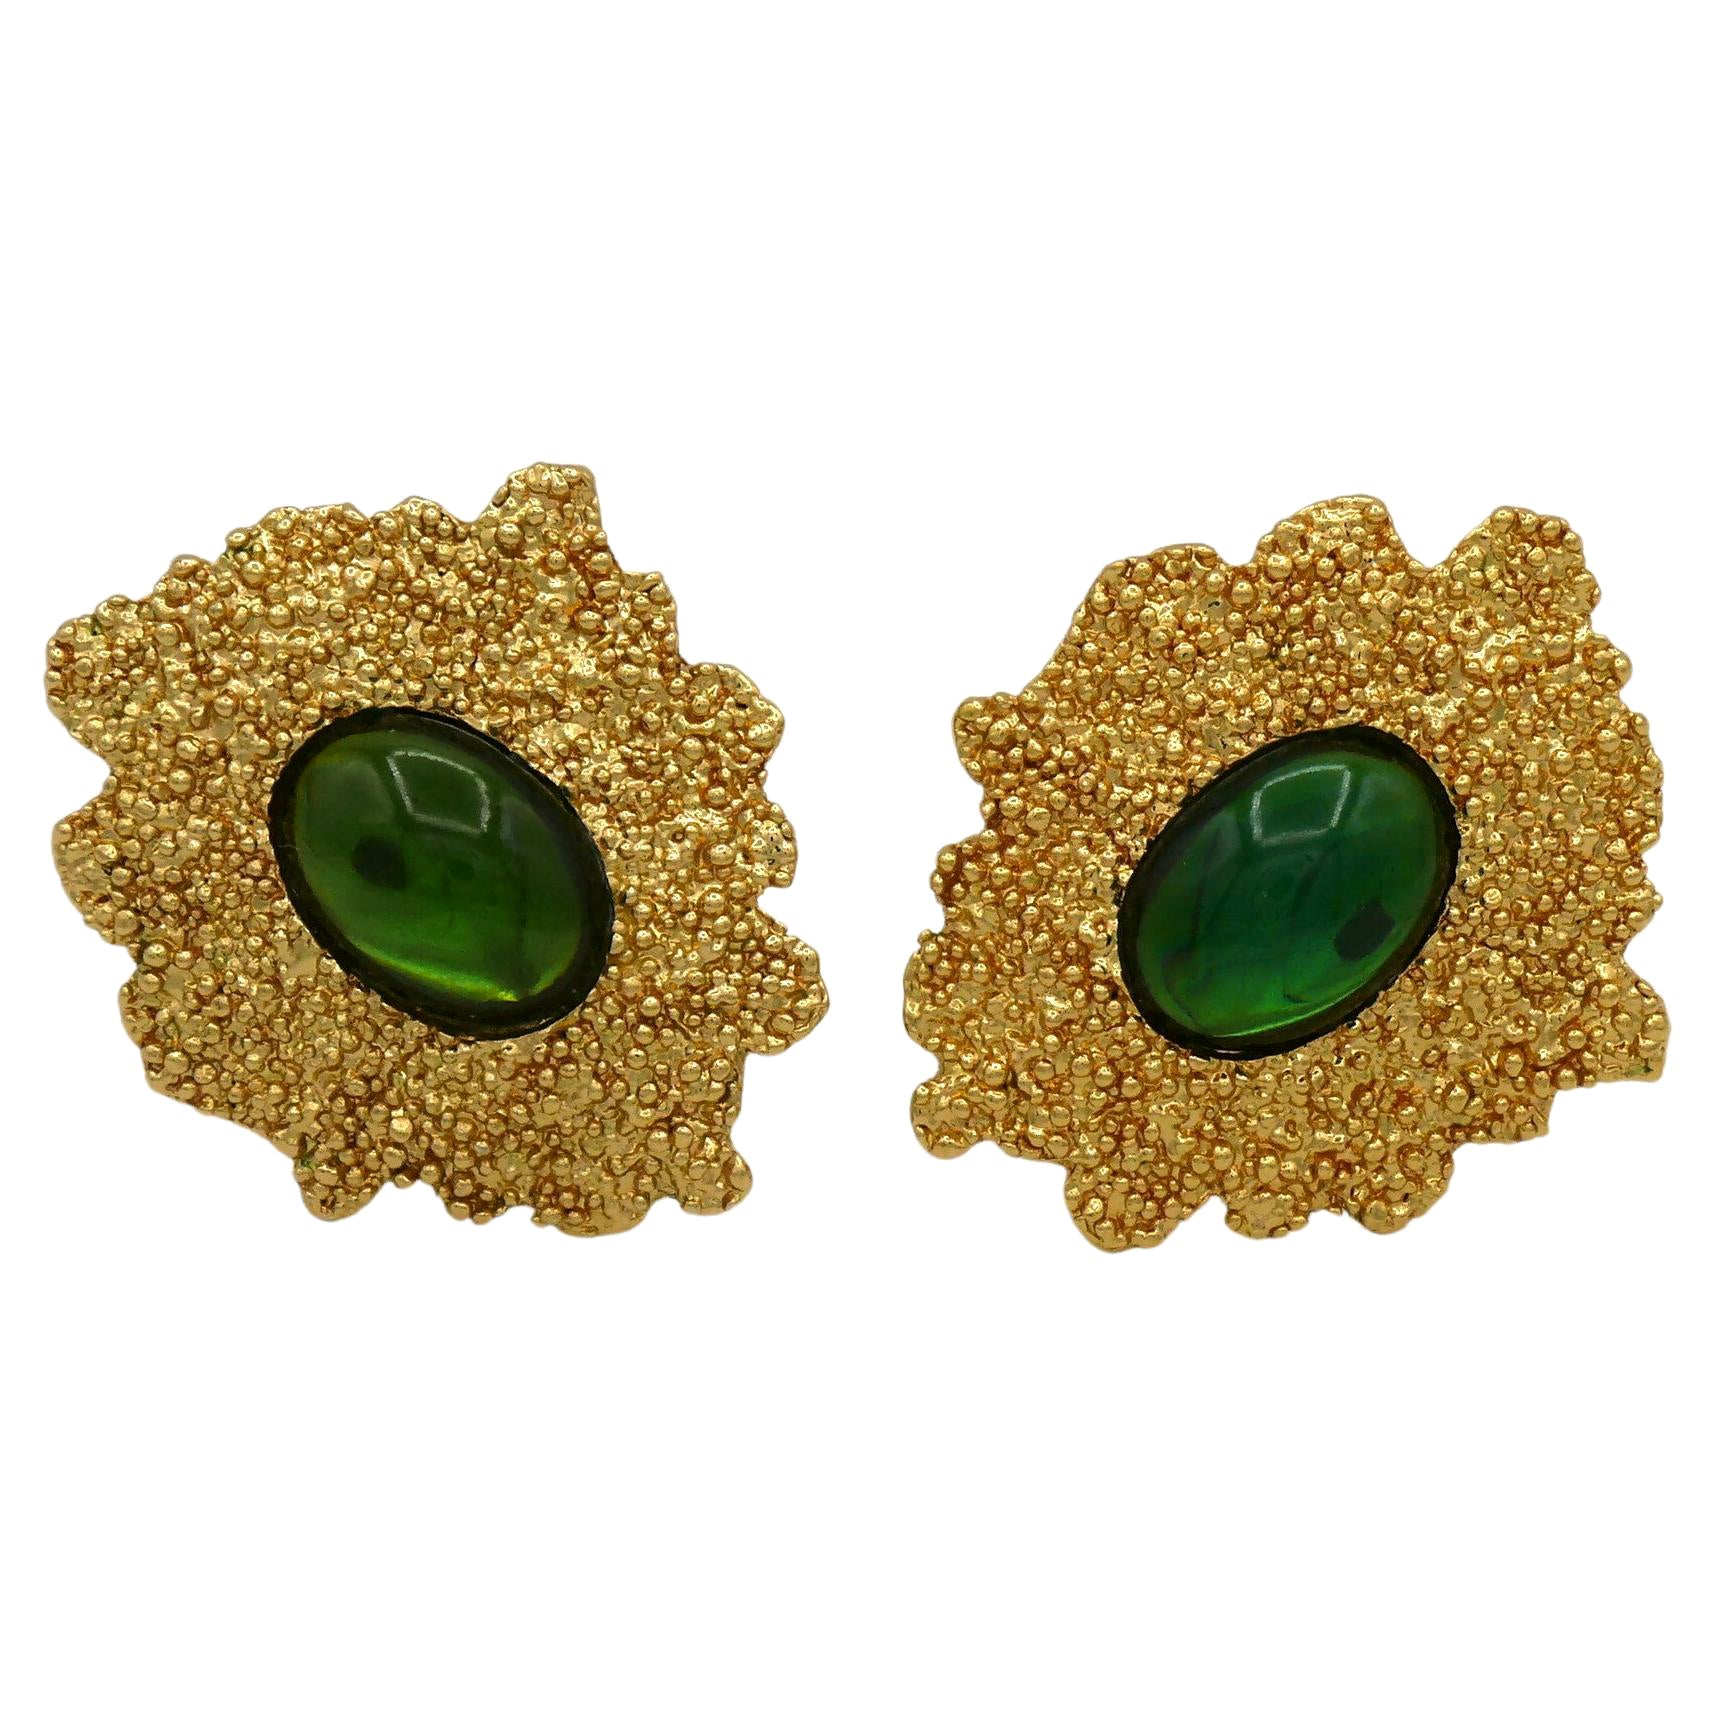 YVES SAINT LAURENT YSL Vintage Green Cabochon Textured Clip-On Earrings For Sale